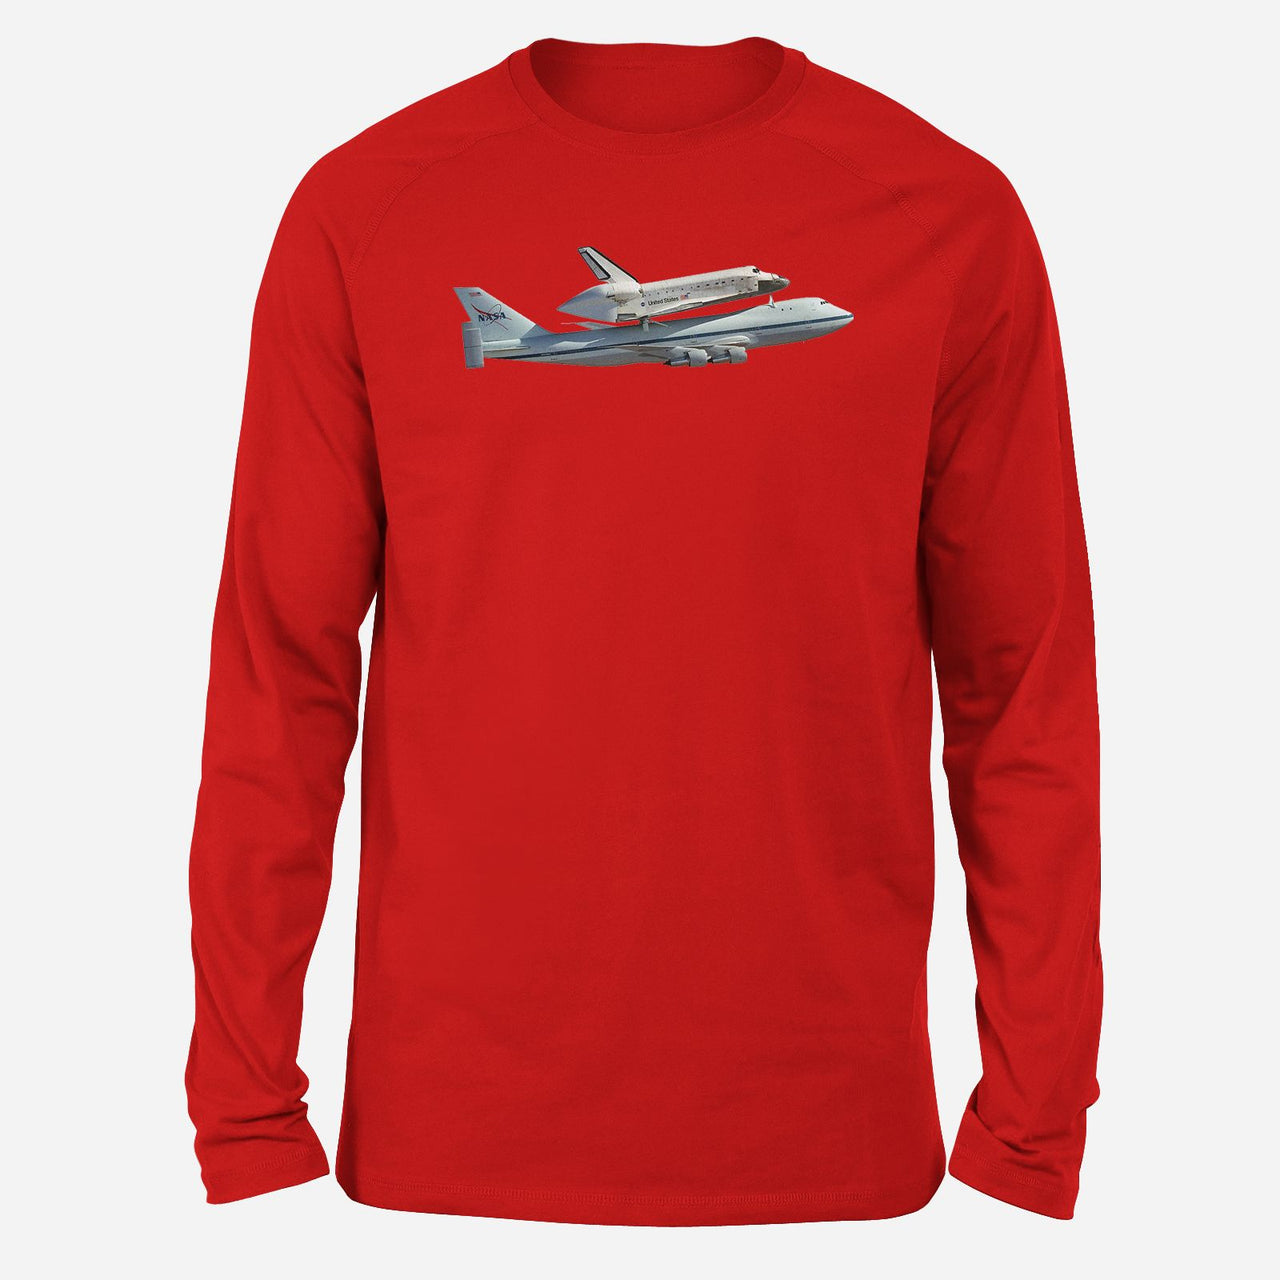 Space shuttle on 747 Designed Long-Sleeve T-Shirts